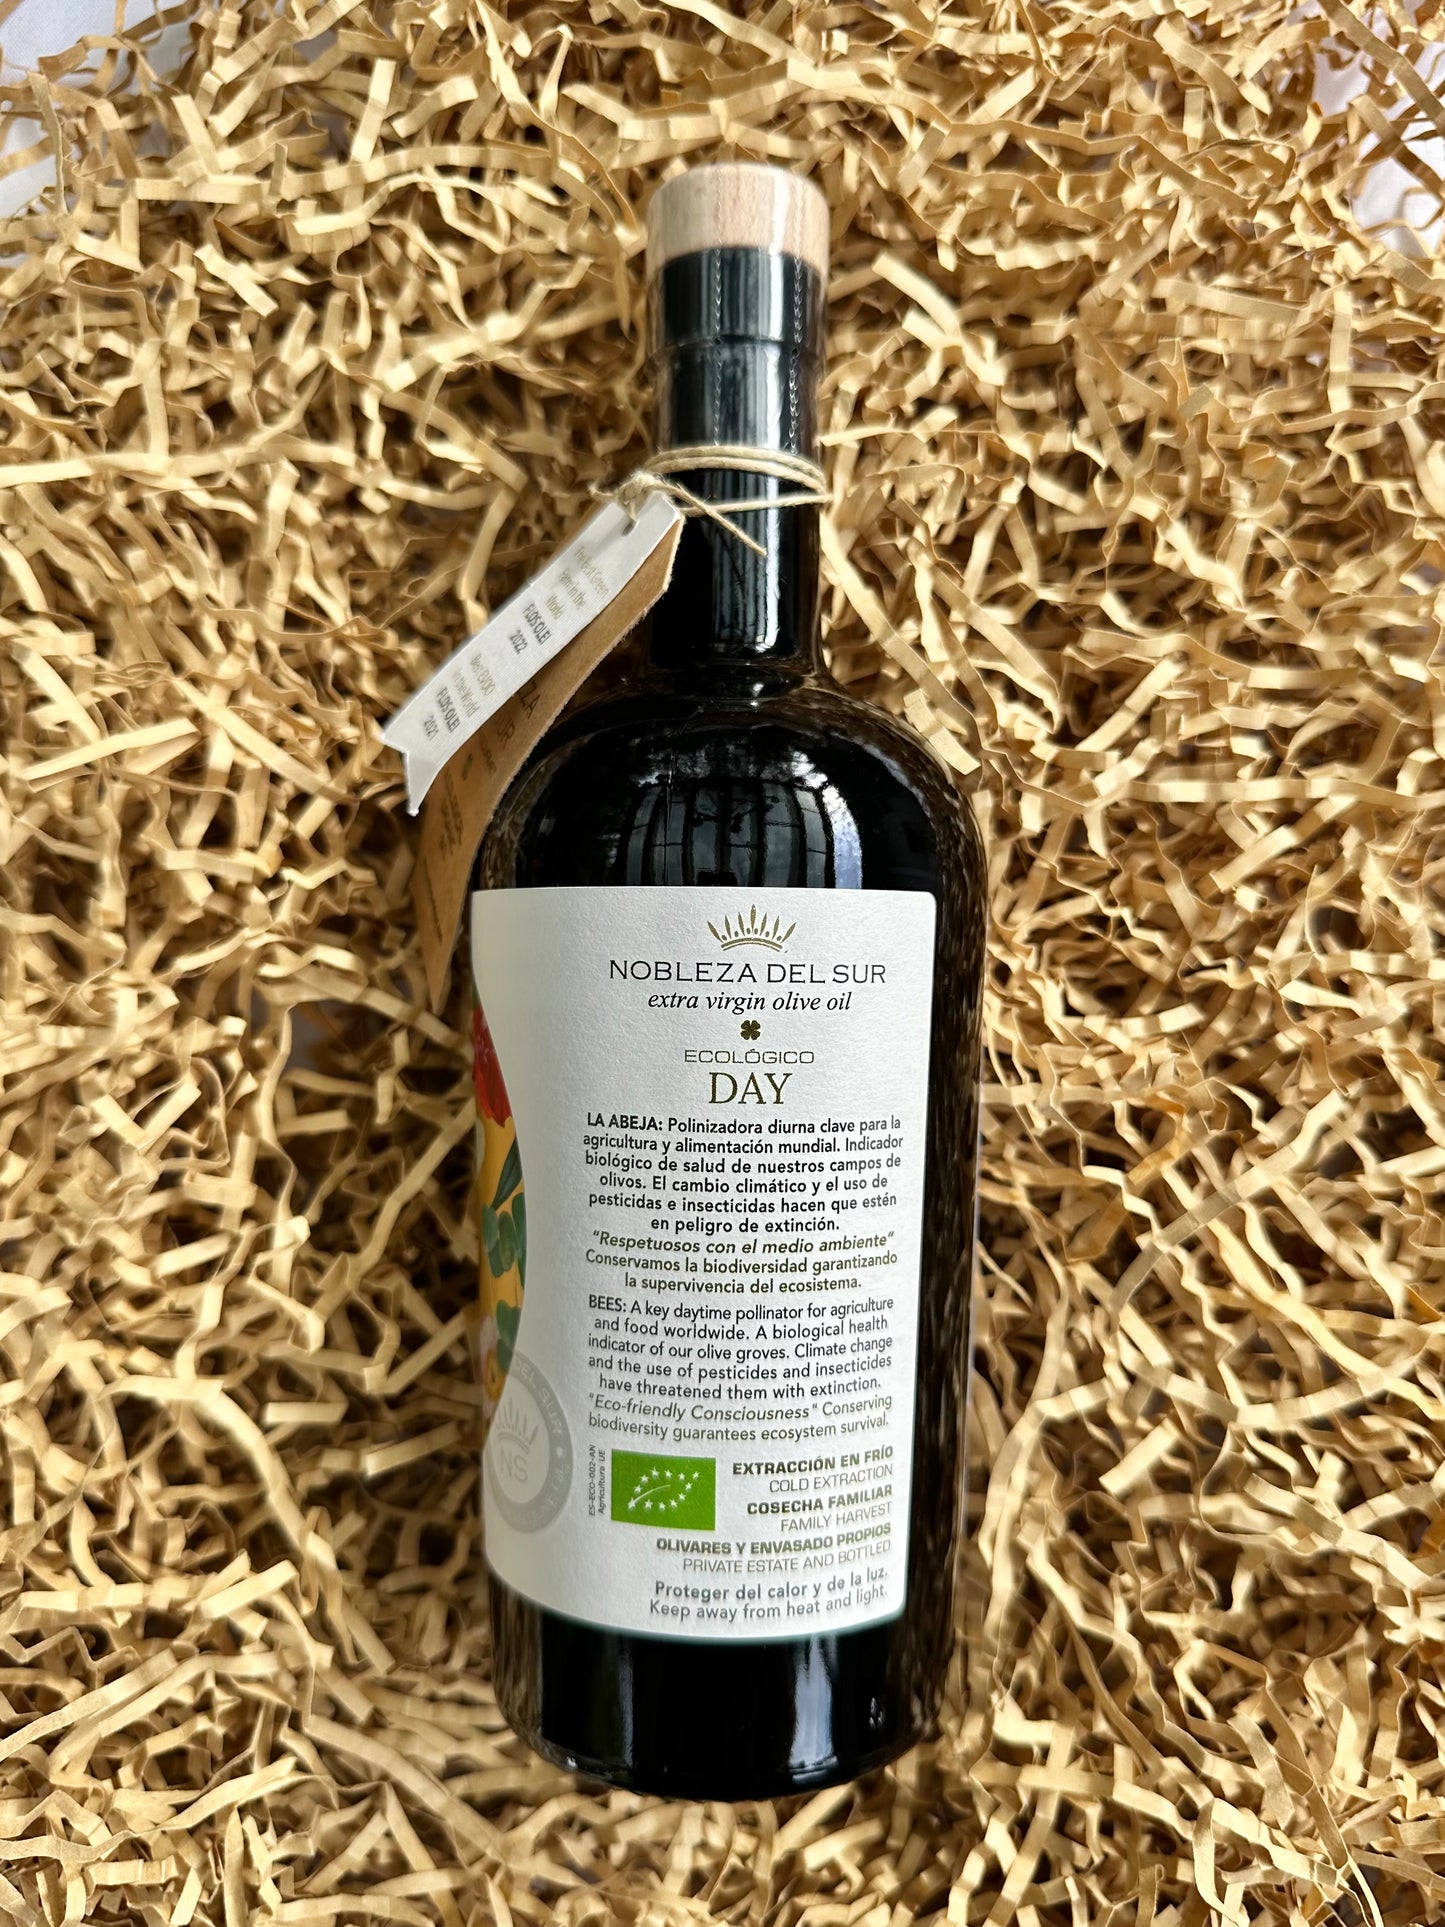 "Day" Extra Virgin Olive Oil by Nobleza del Sur